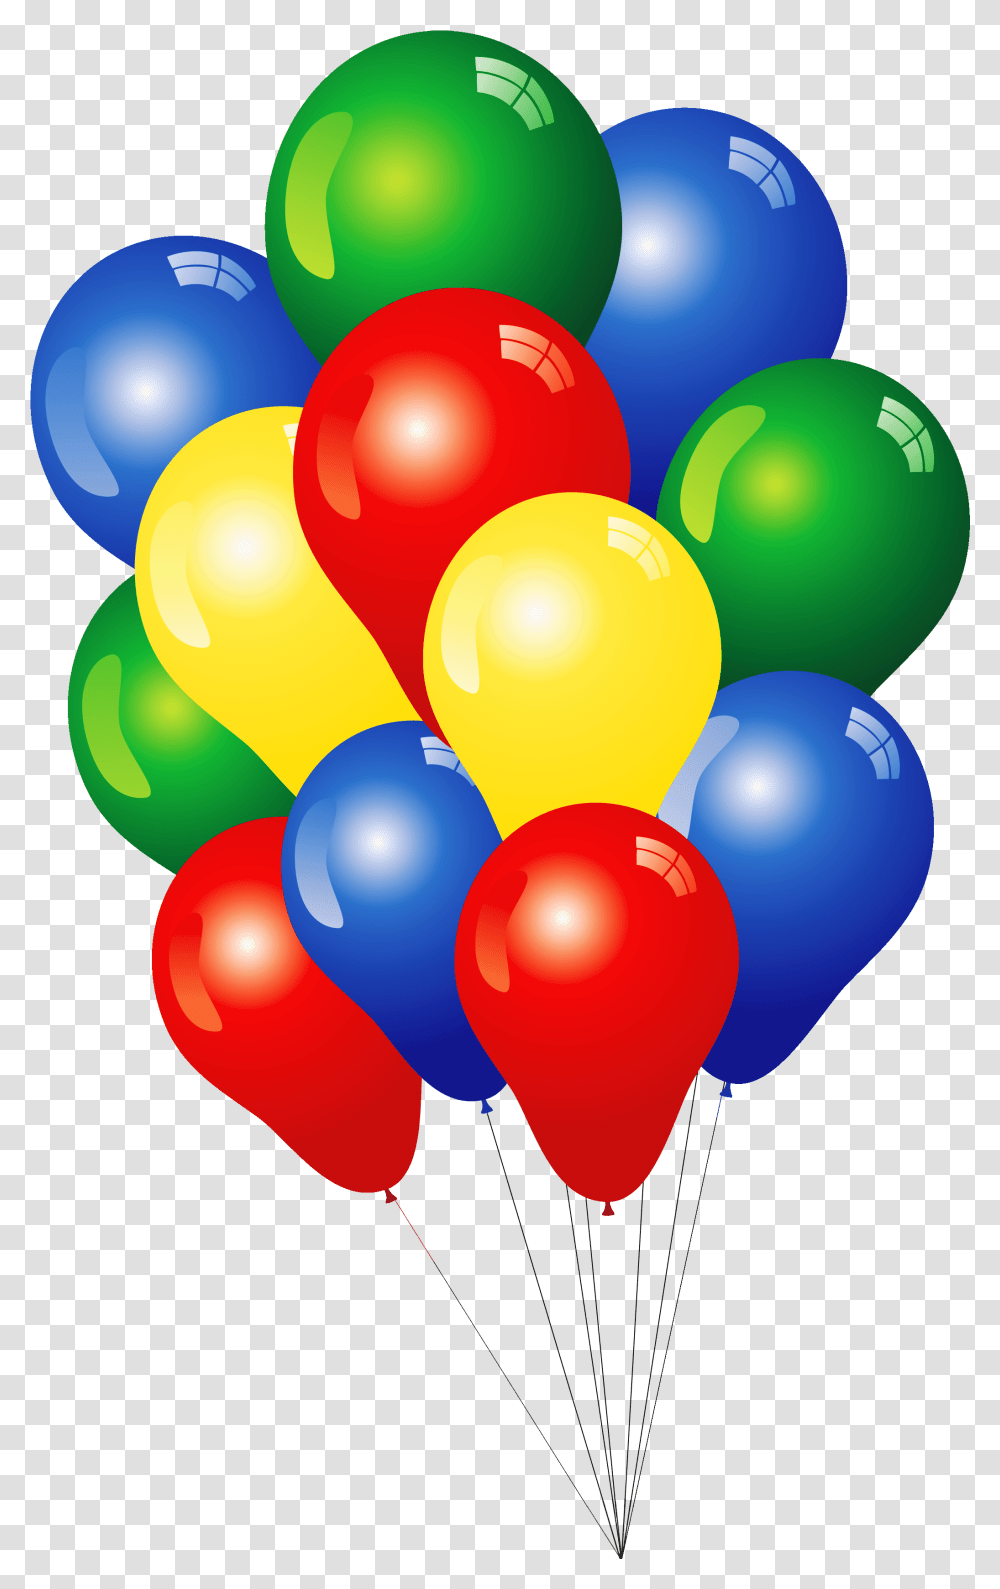 Balloon File Balloons Clipart Transparent Png